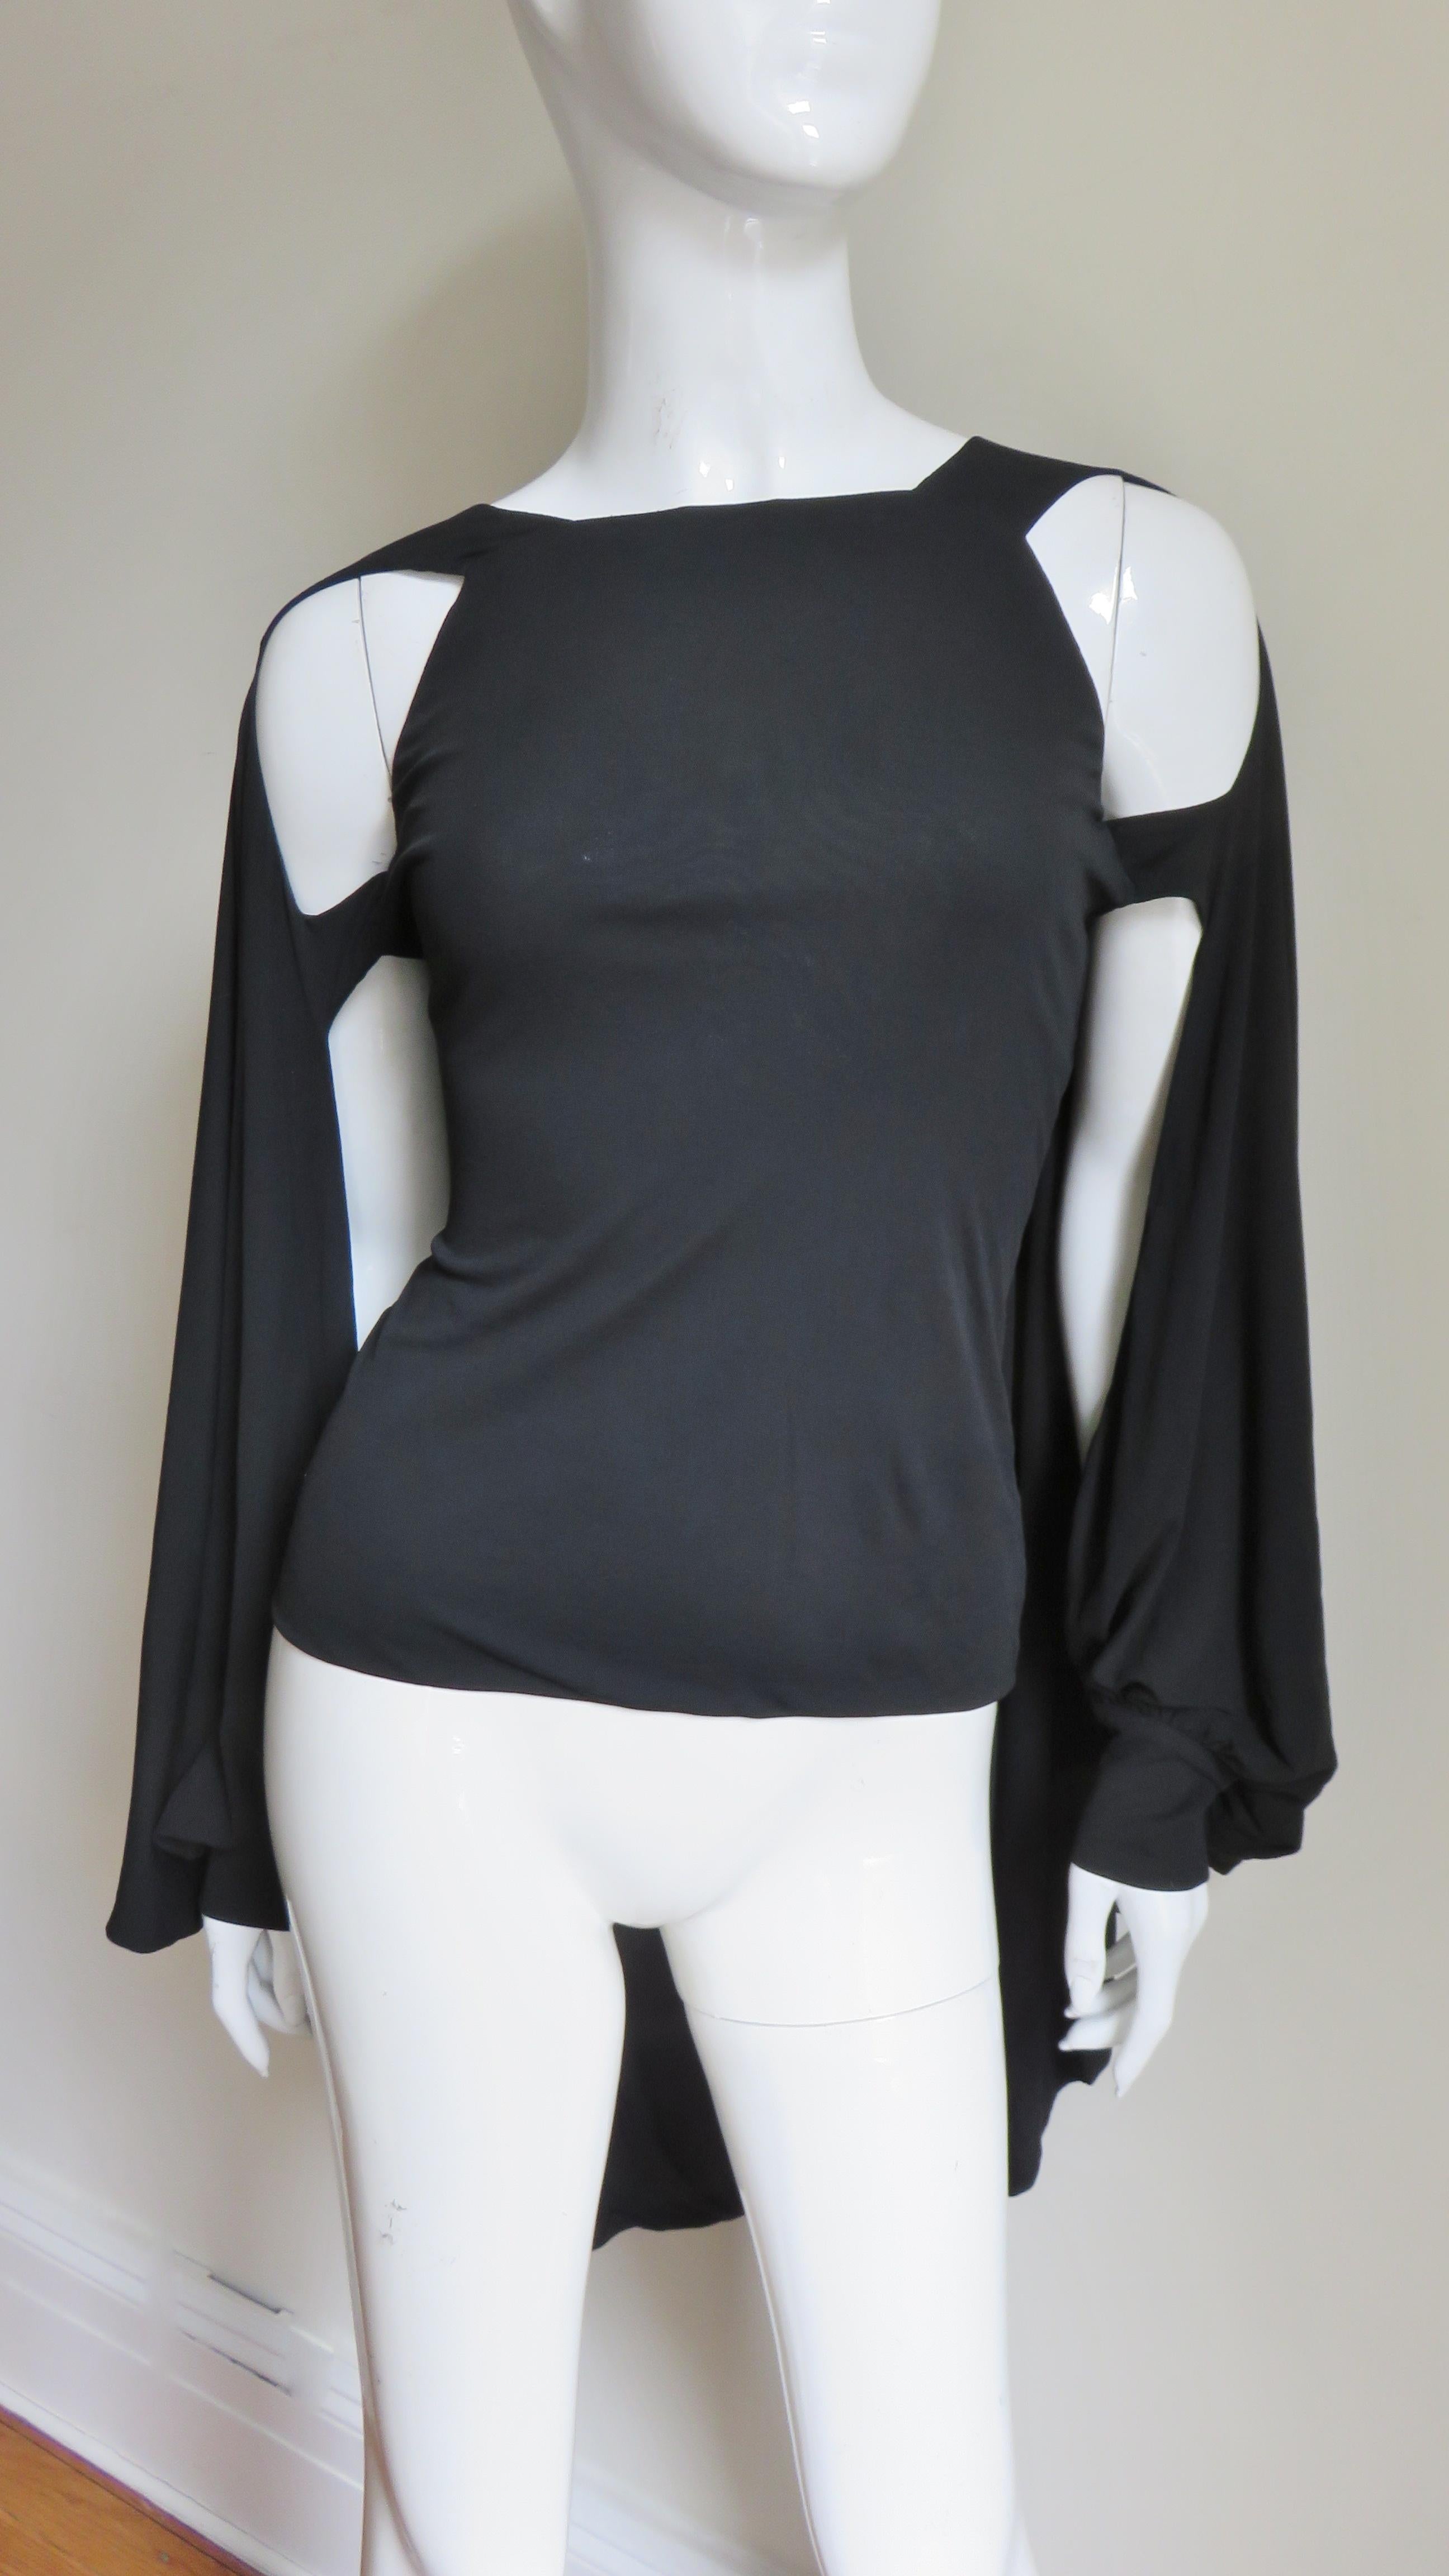 A fabulous fine black silk jersey top from Antonio Berardi.  It is a simply cut with open front sleeves which have 5 button cuffs and the back drapes into a cape. It slips on over the head. Stunning on.
Fits sizes Extra Small, Small, Medium. Marked